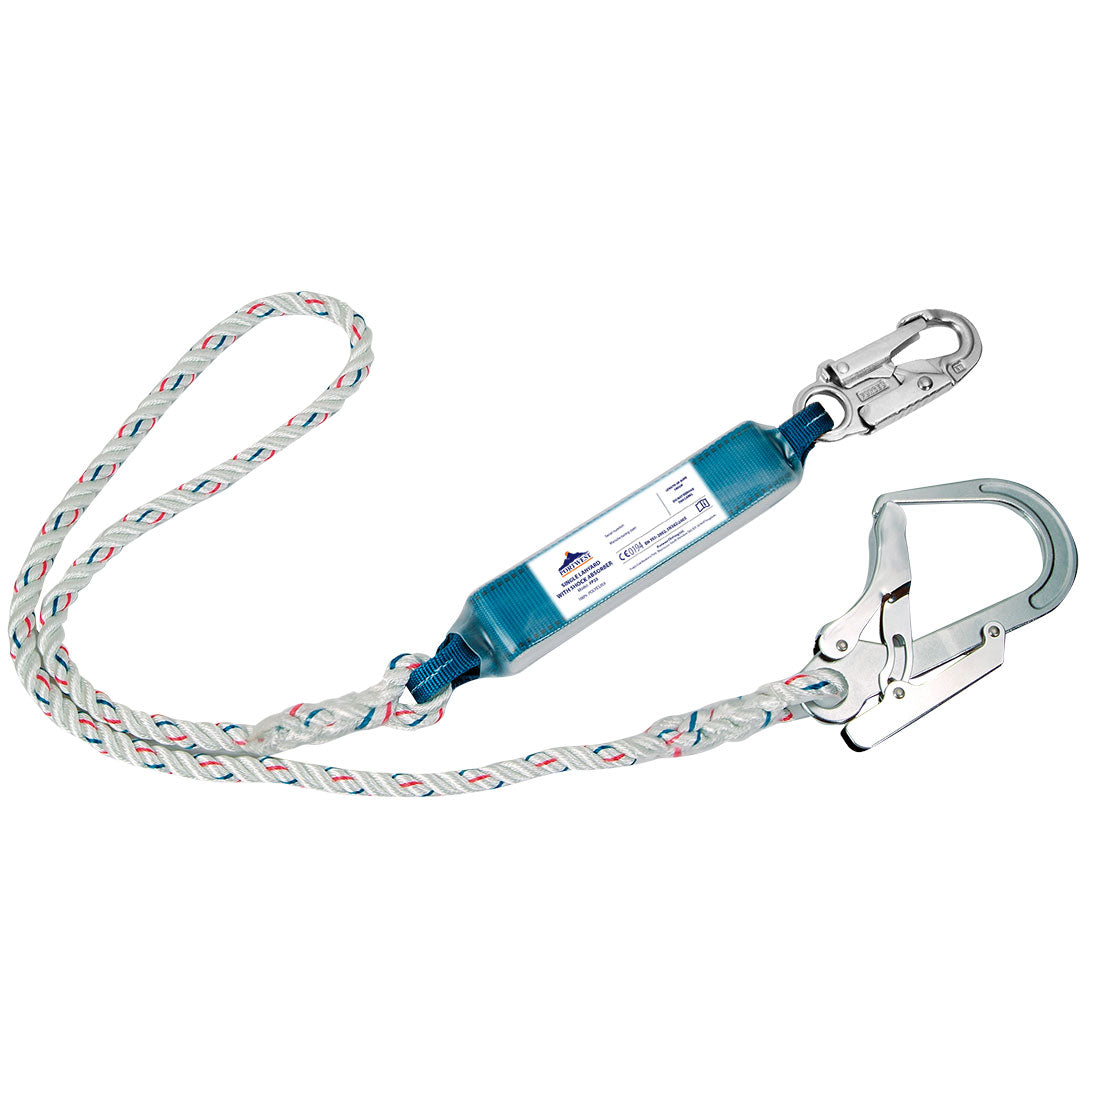 Portwest Single Lanyard With Shock Absorber